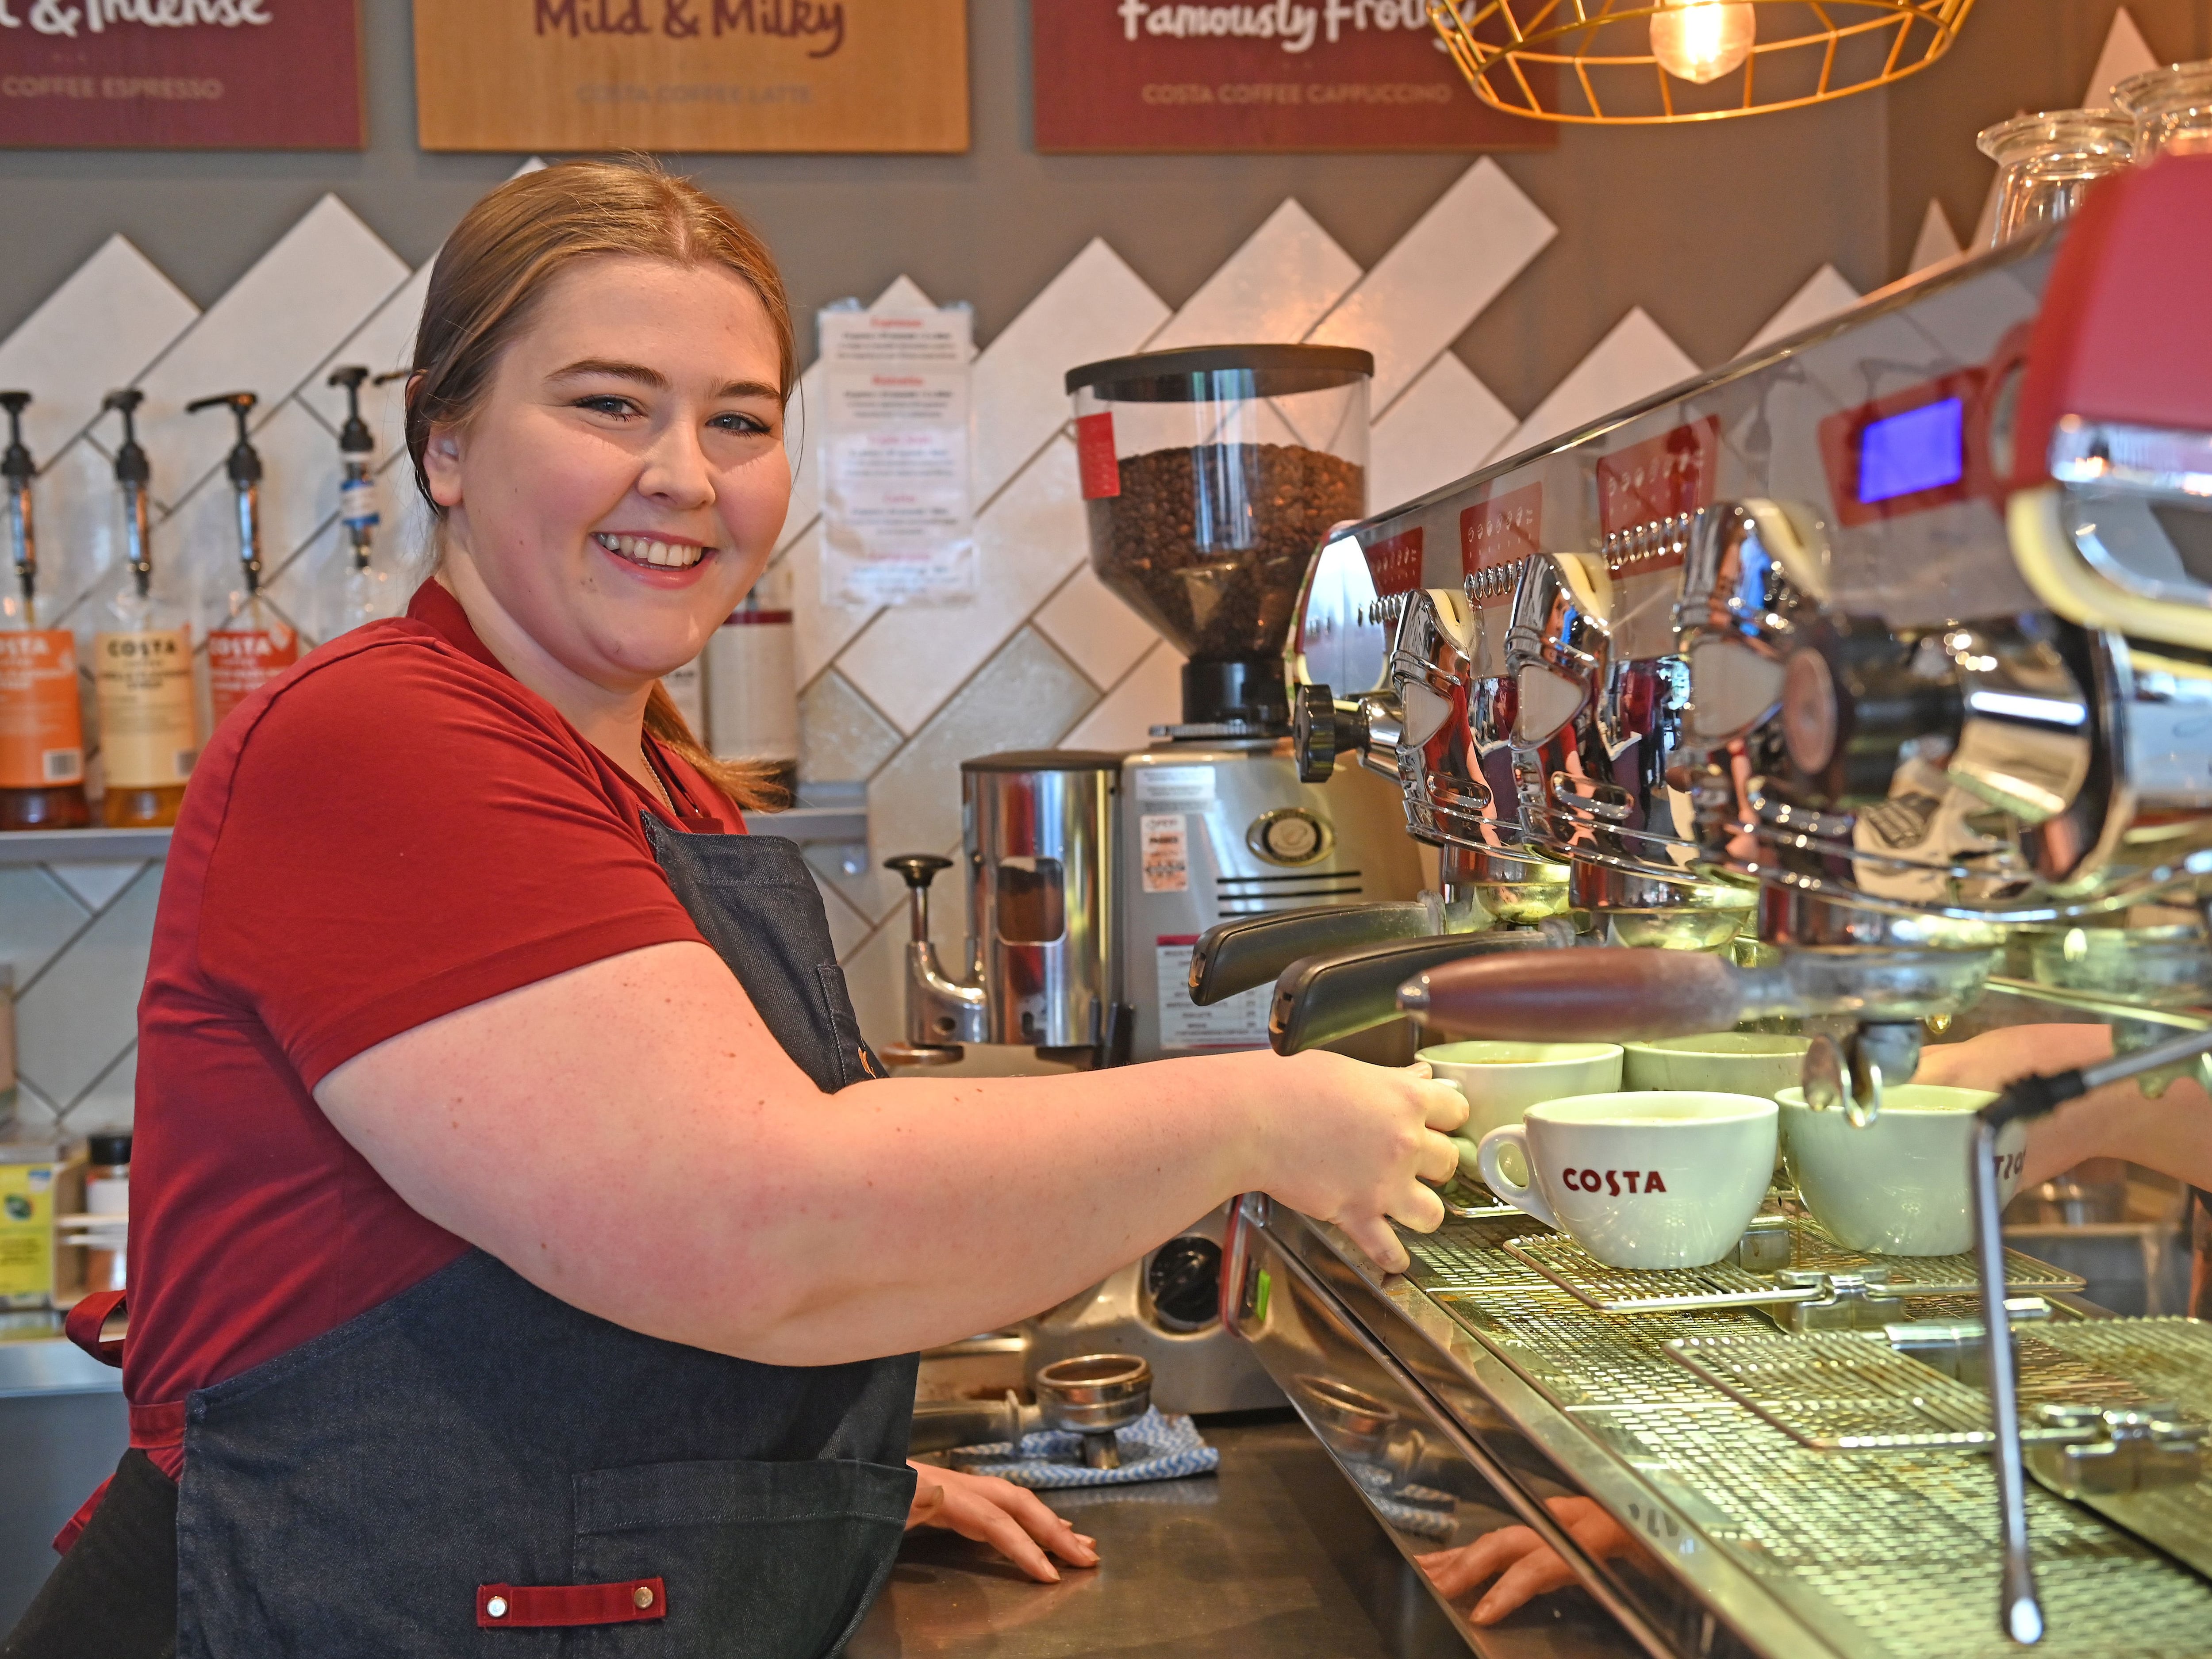 Barista ready to take on world in competition